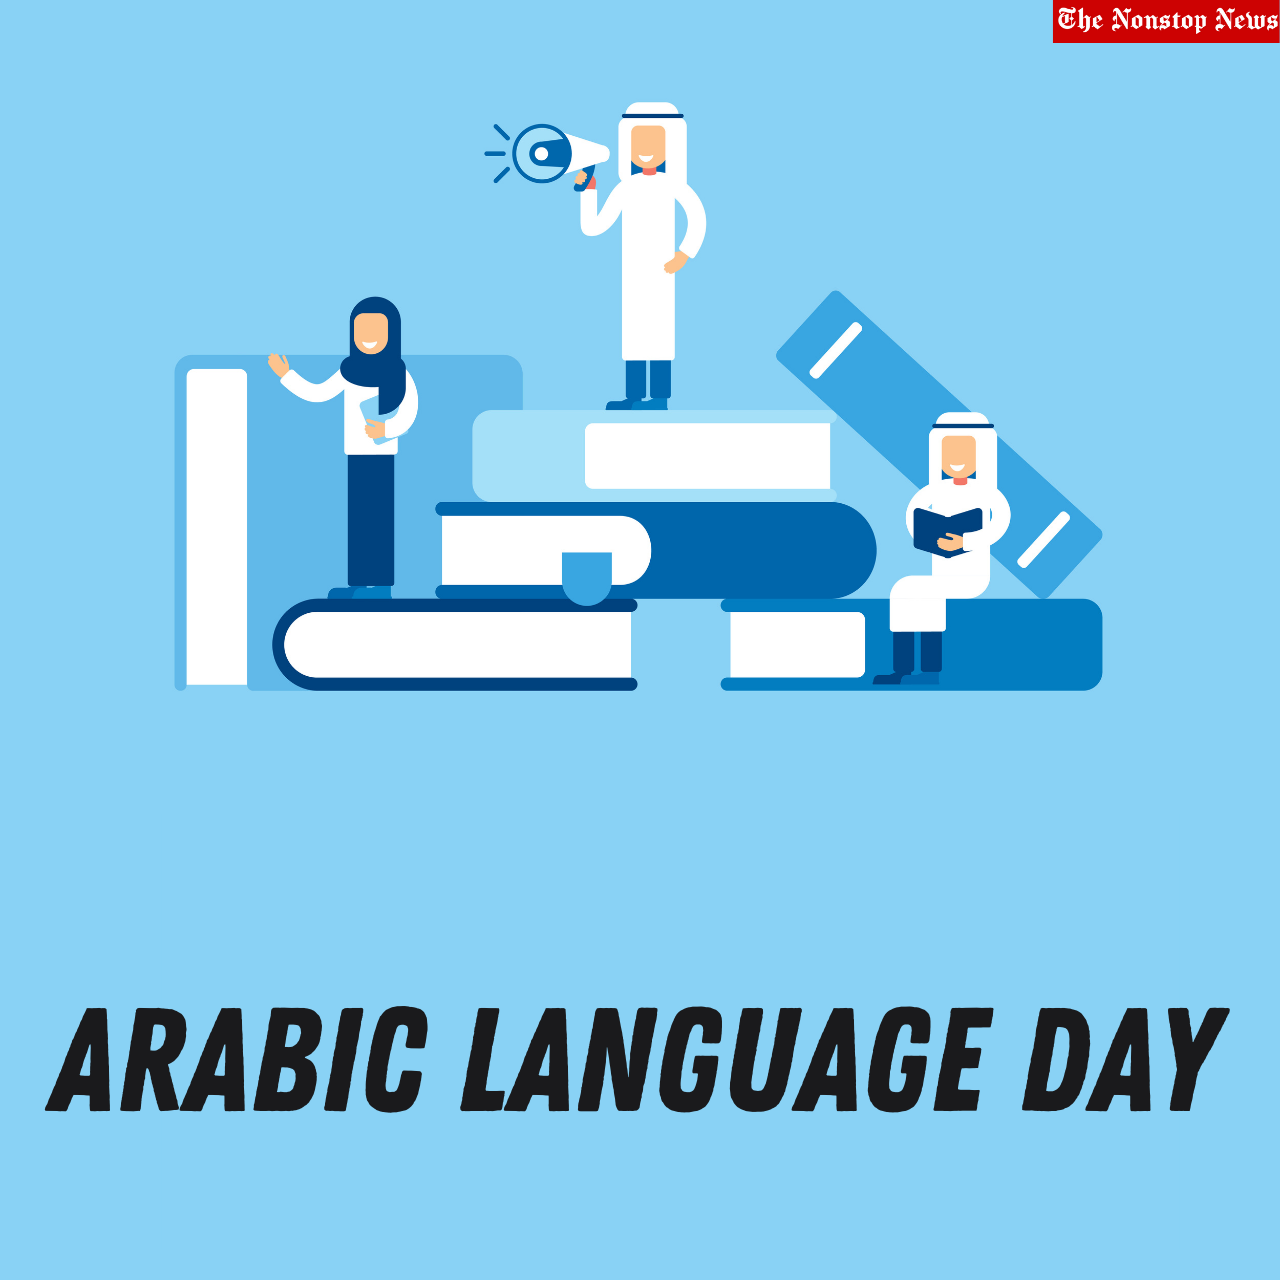 Arabic Language Day 2021 Quotes, Poster, Images, Wishes, Greetings, Banners, and Slogans to share